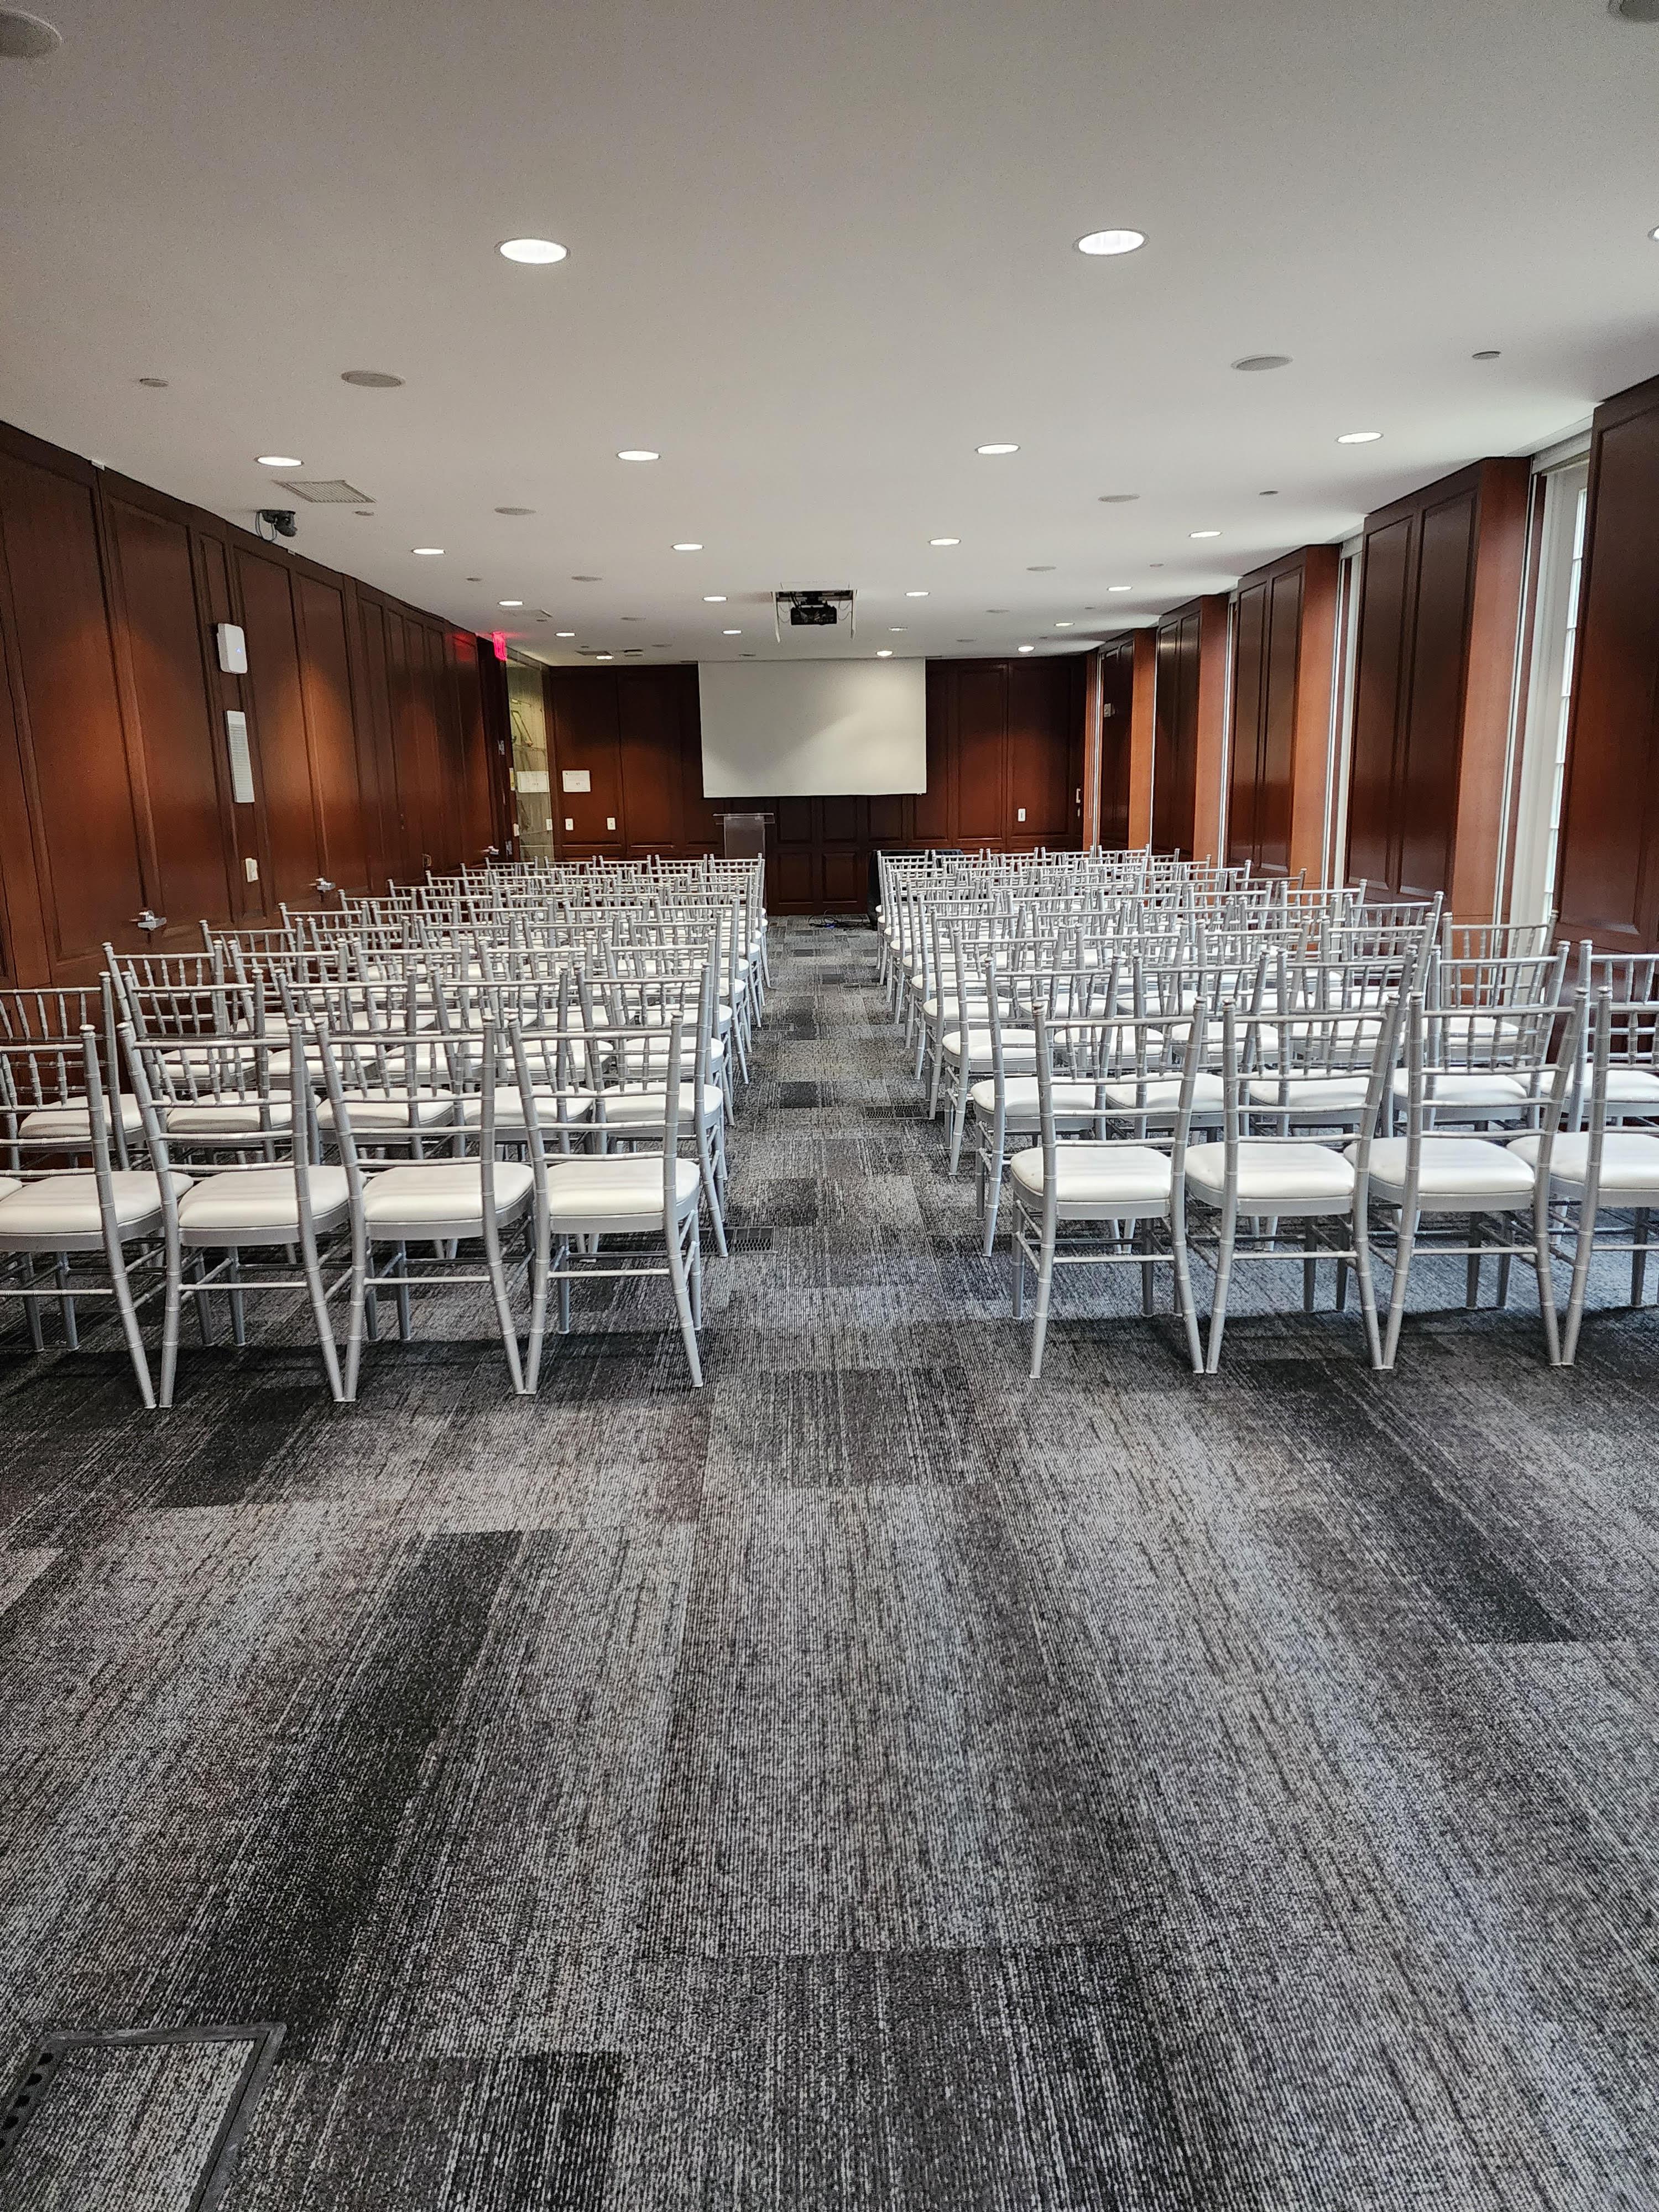 Long room set theater style with silver chivari chairs